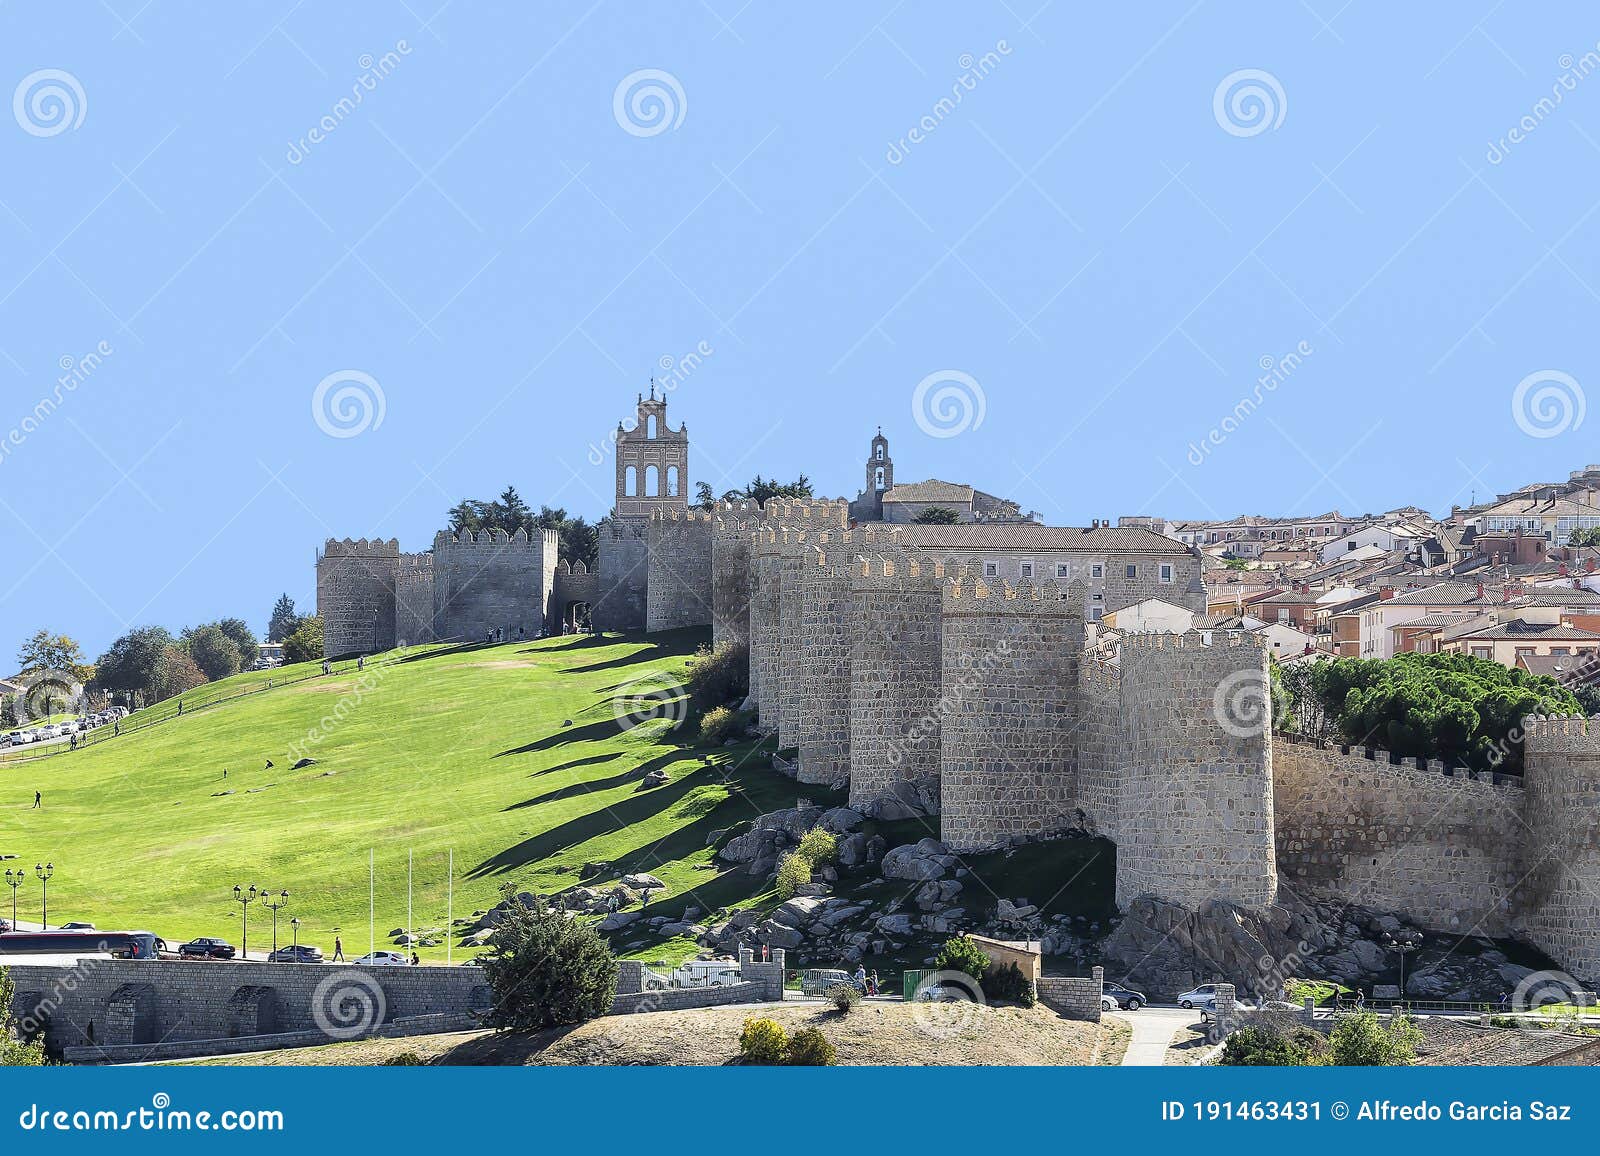 view of medieval city of avila walls between the gate del carmen and the cubo de san segundo. this city was declared a unesco